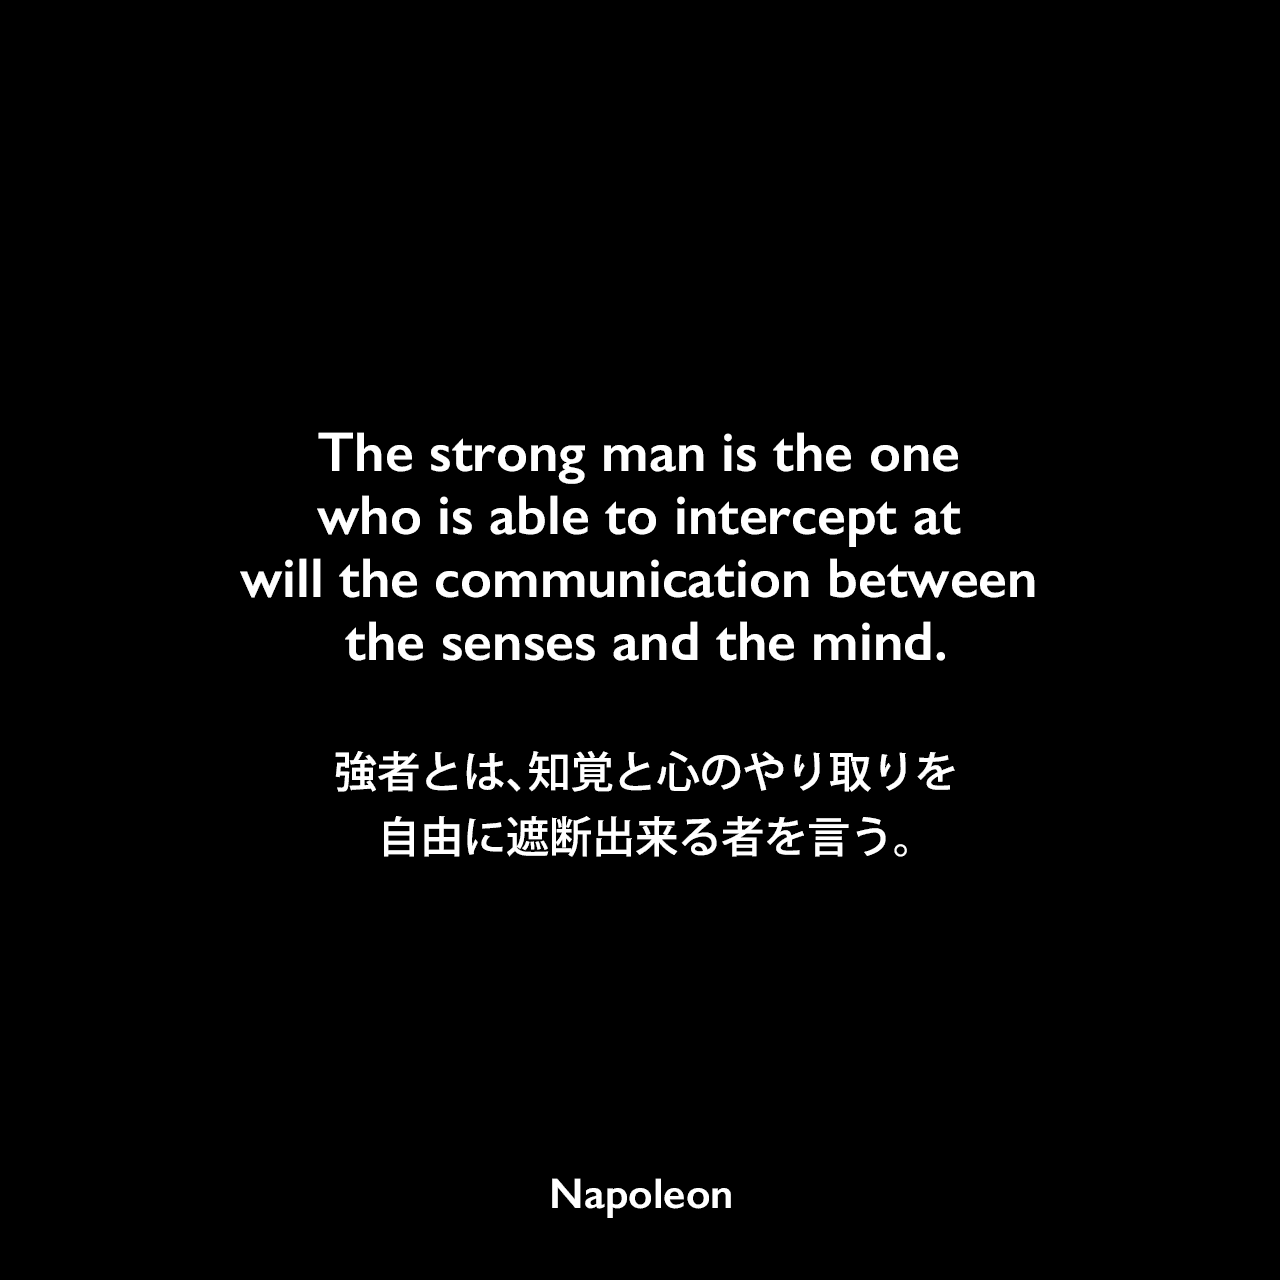 The strong man is the one who is able to intercept at will the communication between the senses and the mind.強者とは、知覚と心のやり取りを自由に遮断出来る者を言う。Napoleon